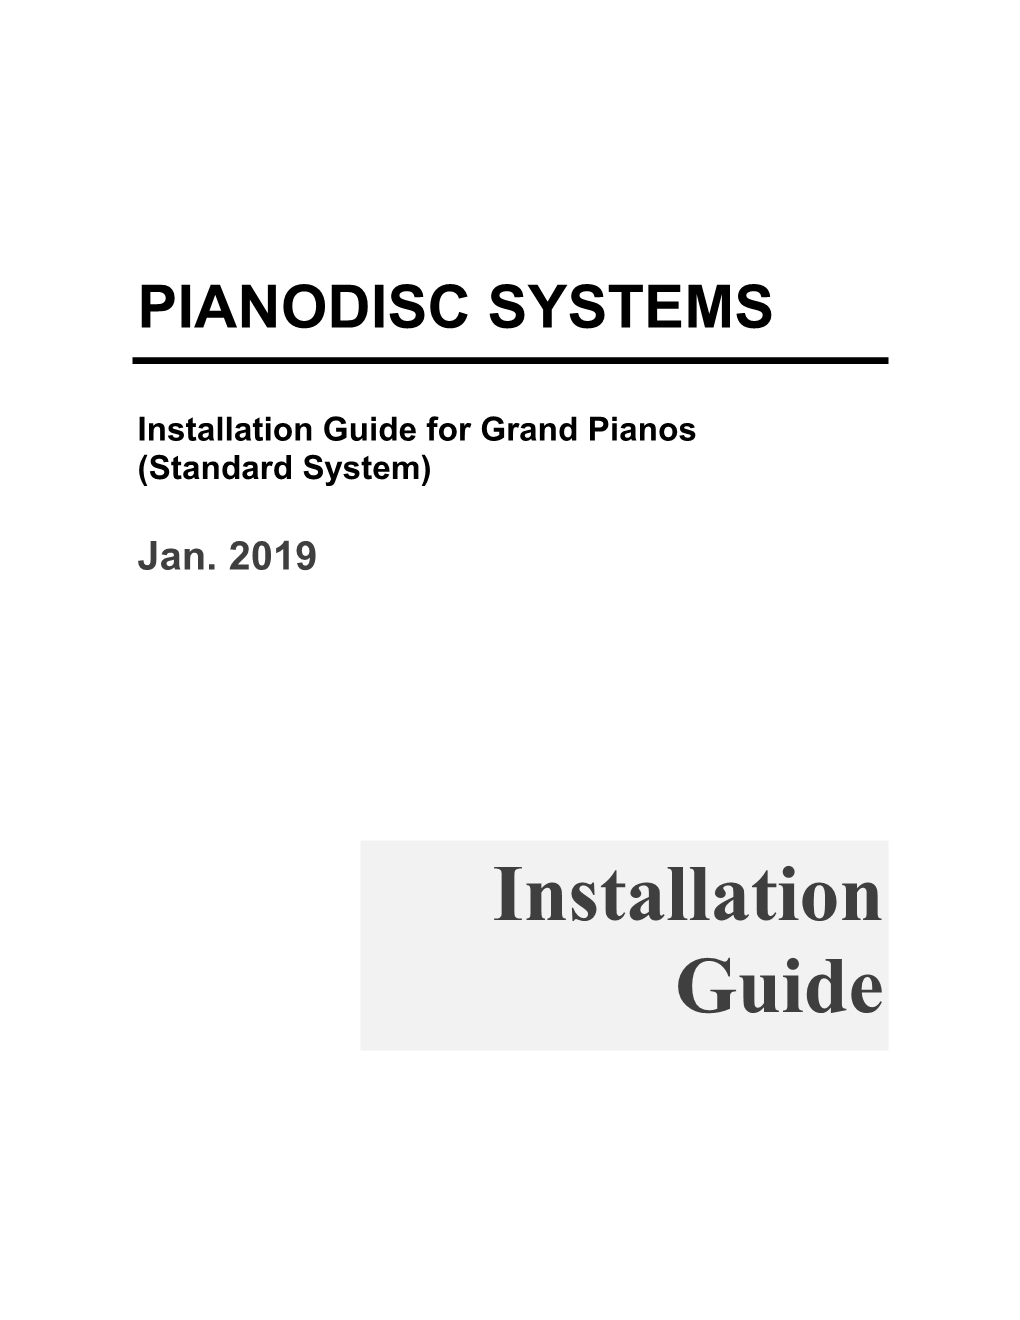 Installation Guide for Grand Pianos (Standard System)